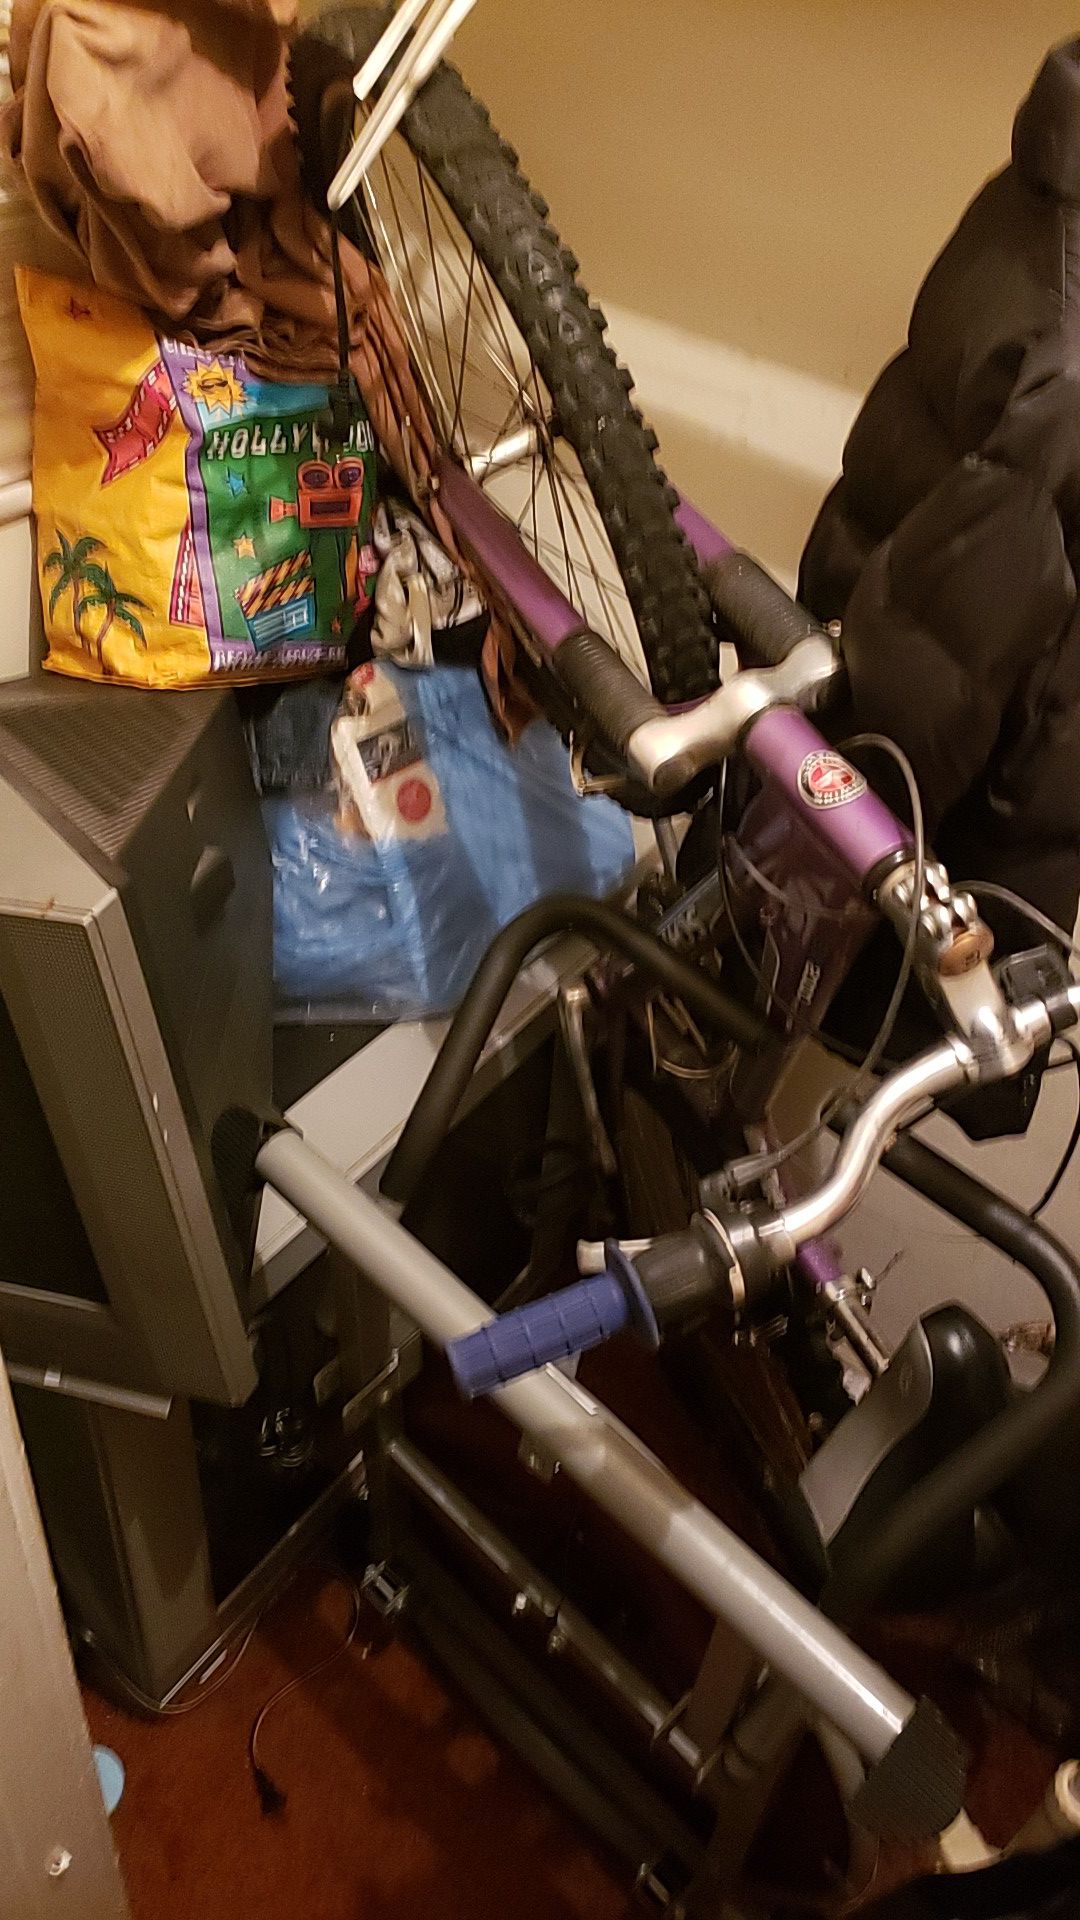 Bikes, lamps, microwave and more